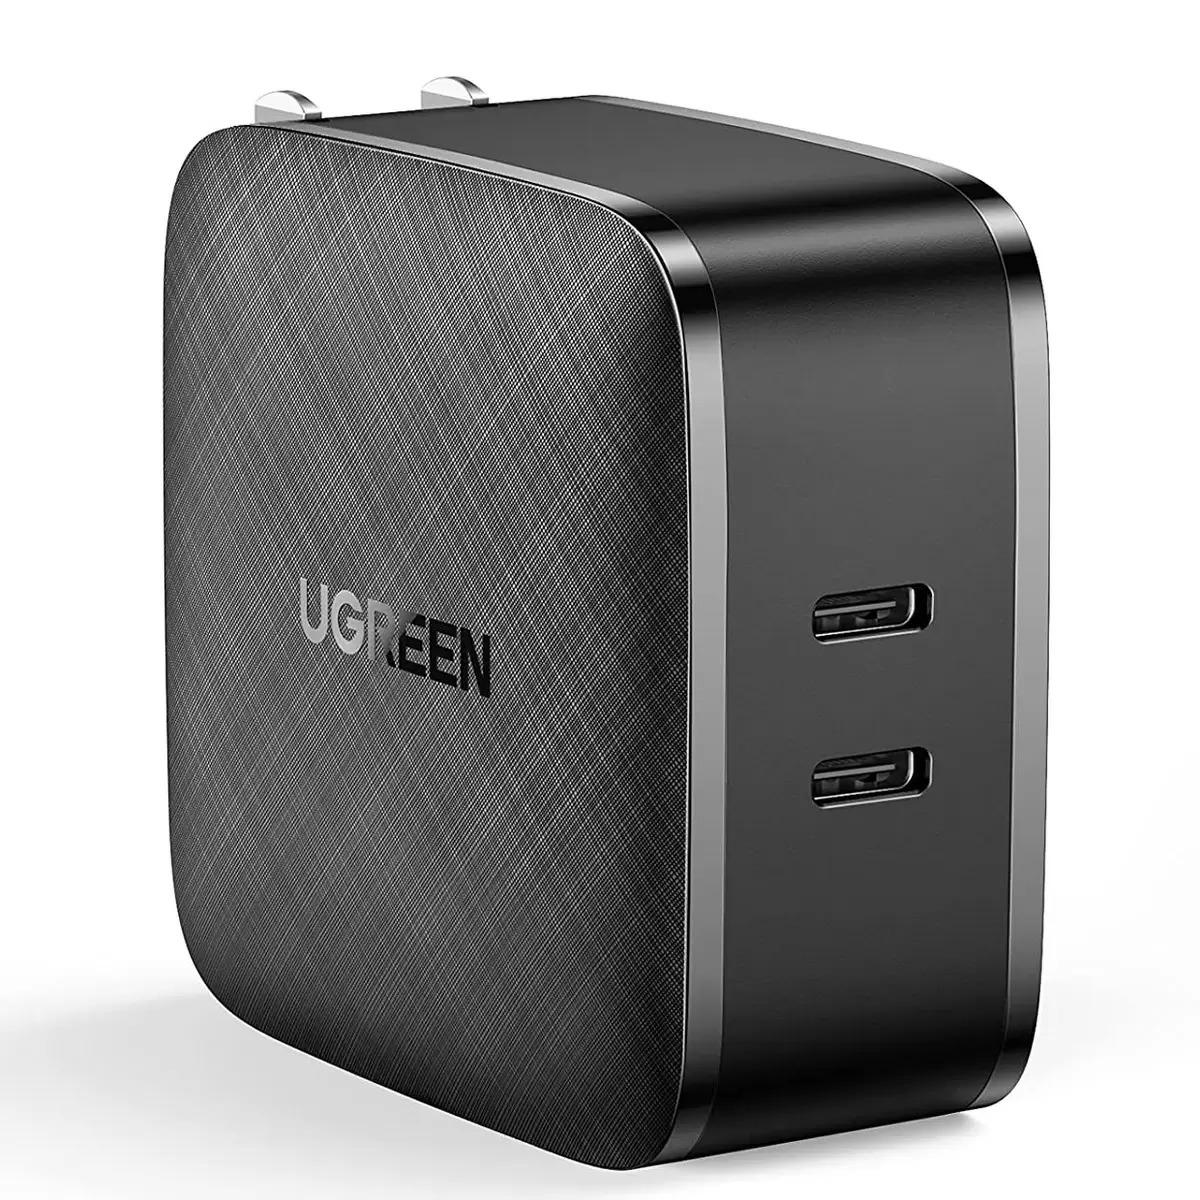 Ugreen 65W 2 Port PD USB C Wall Charger for $19.97